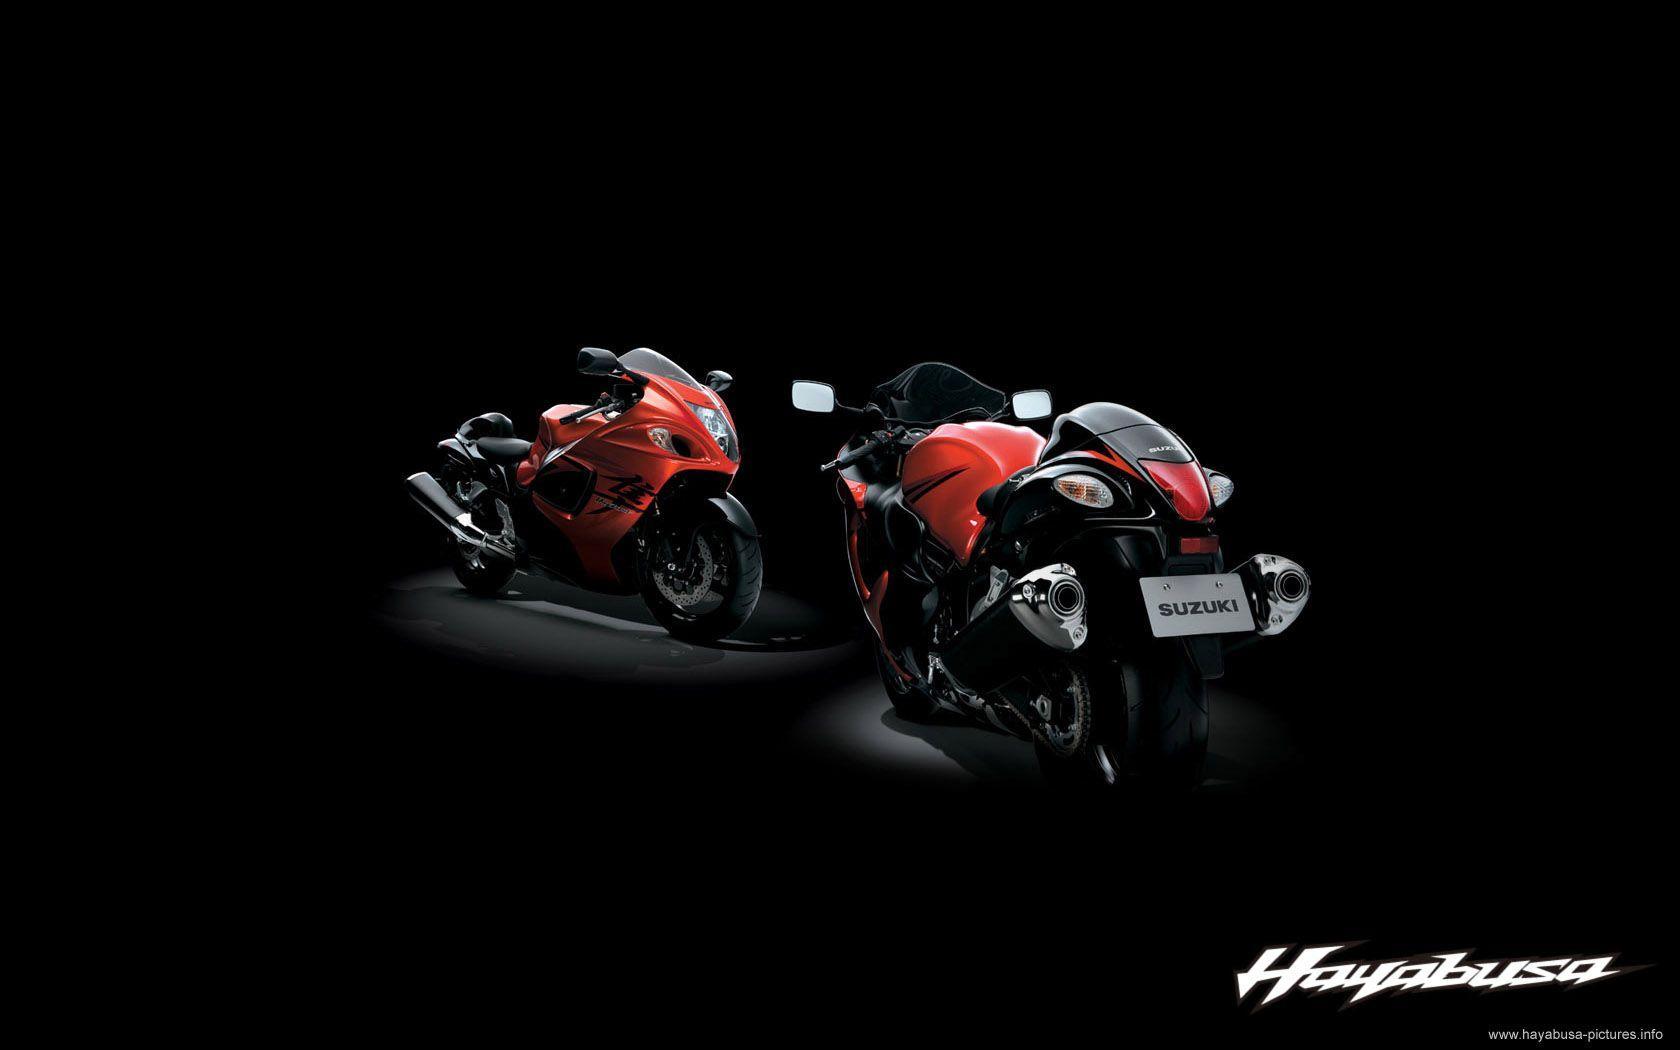 Hayabusa Wallpapers and Pictures